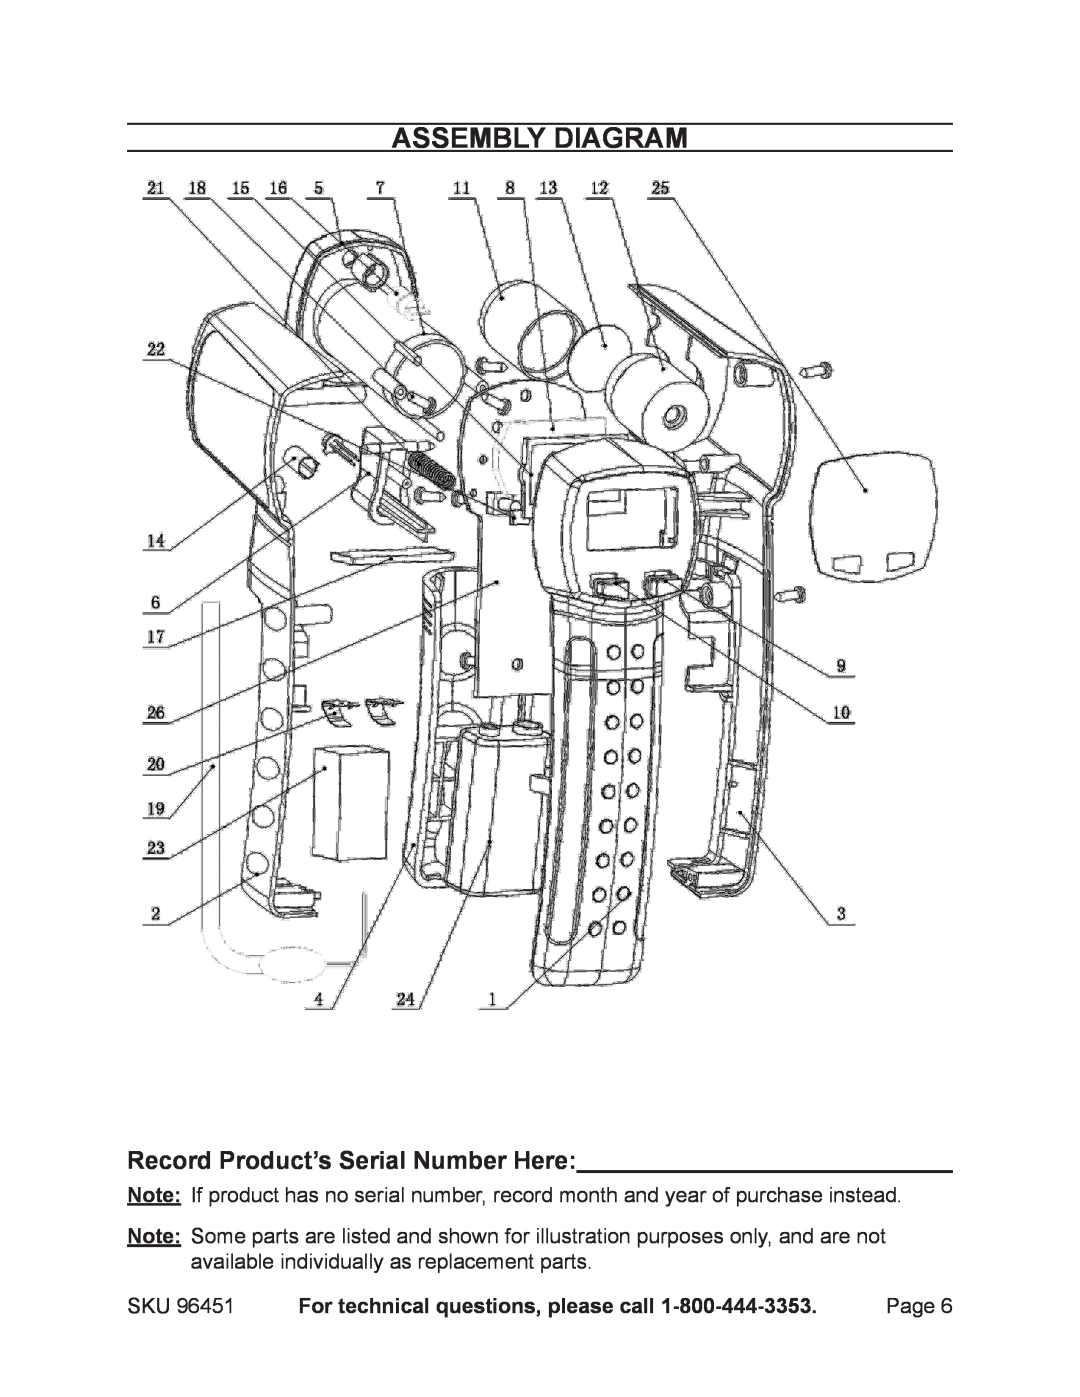 Harbor Freight Tools 96451 Assembly Diagram, Record Product’s Serial Number Here, For technical questions, please call 